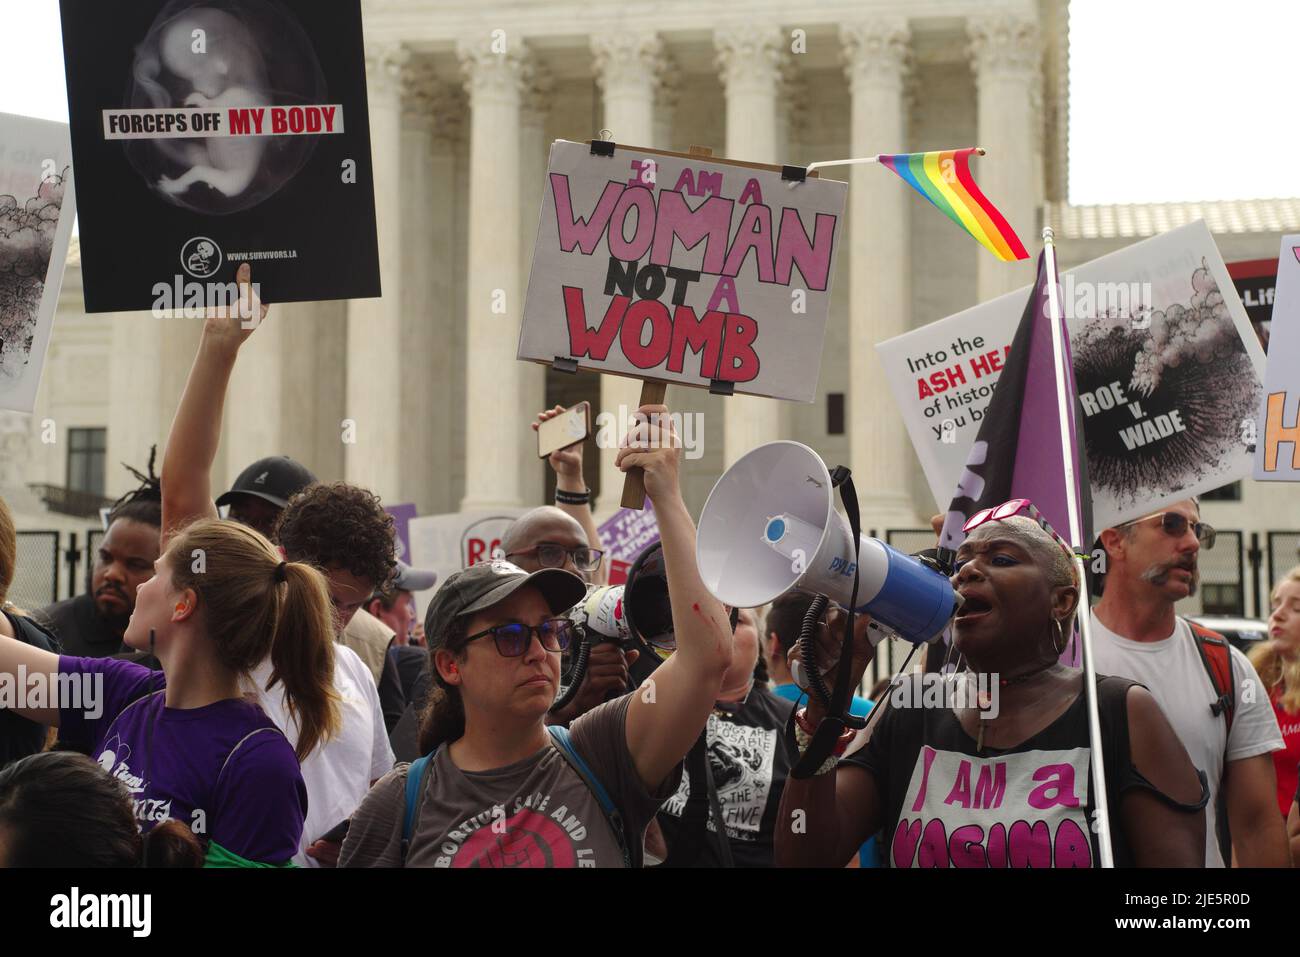 Protesters on both sides of the abortion debate gathered at the U.S. Supreme Court as they overturned Roe v. Wade on 24 June 2022. Stock Photo